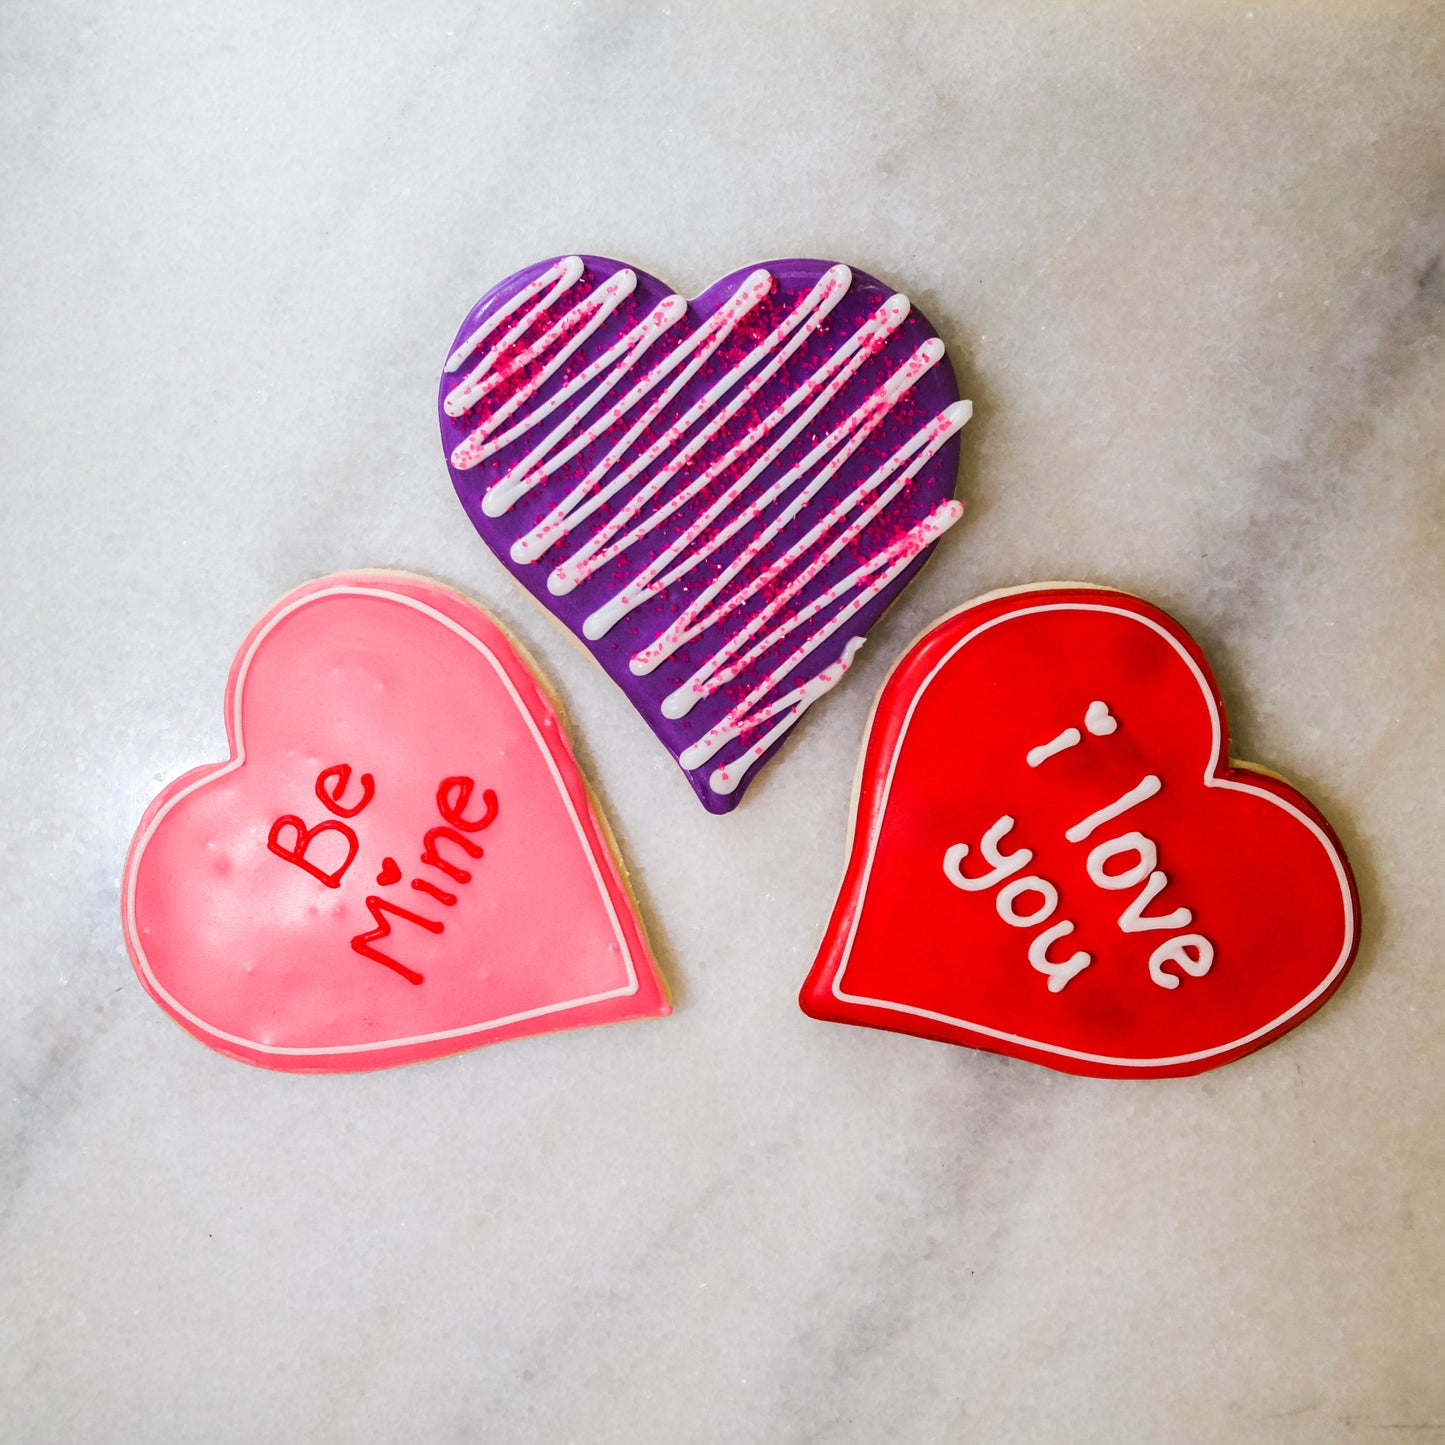 4-piece "Large Hearts" Thin Shortbread Cookies Gift Tin